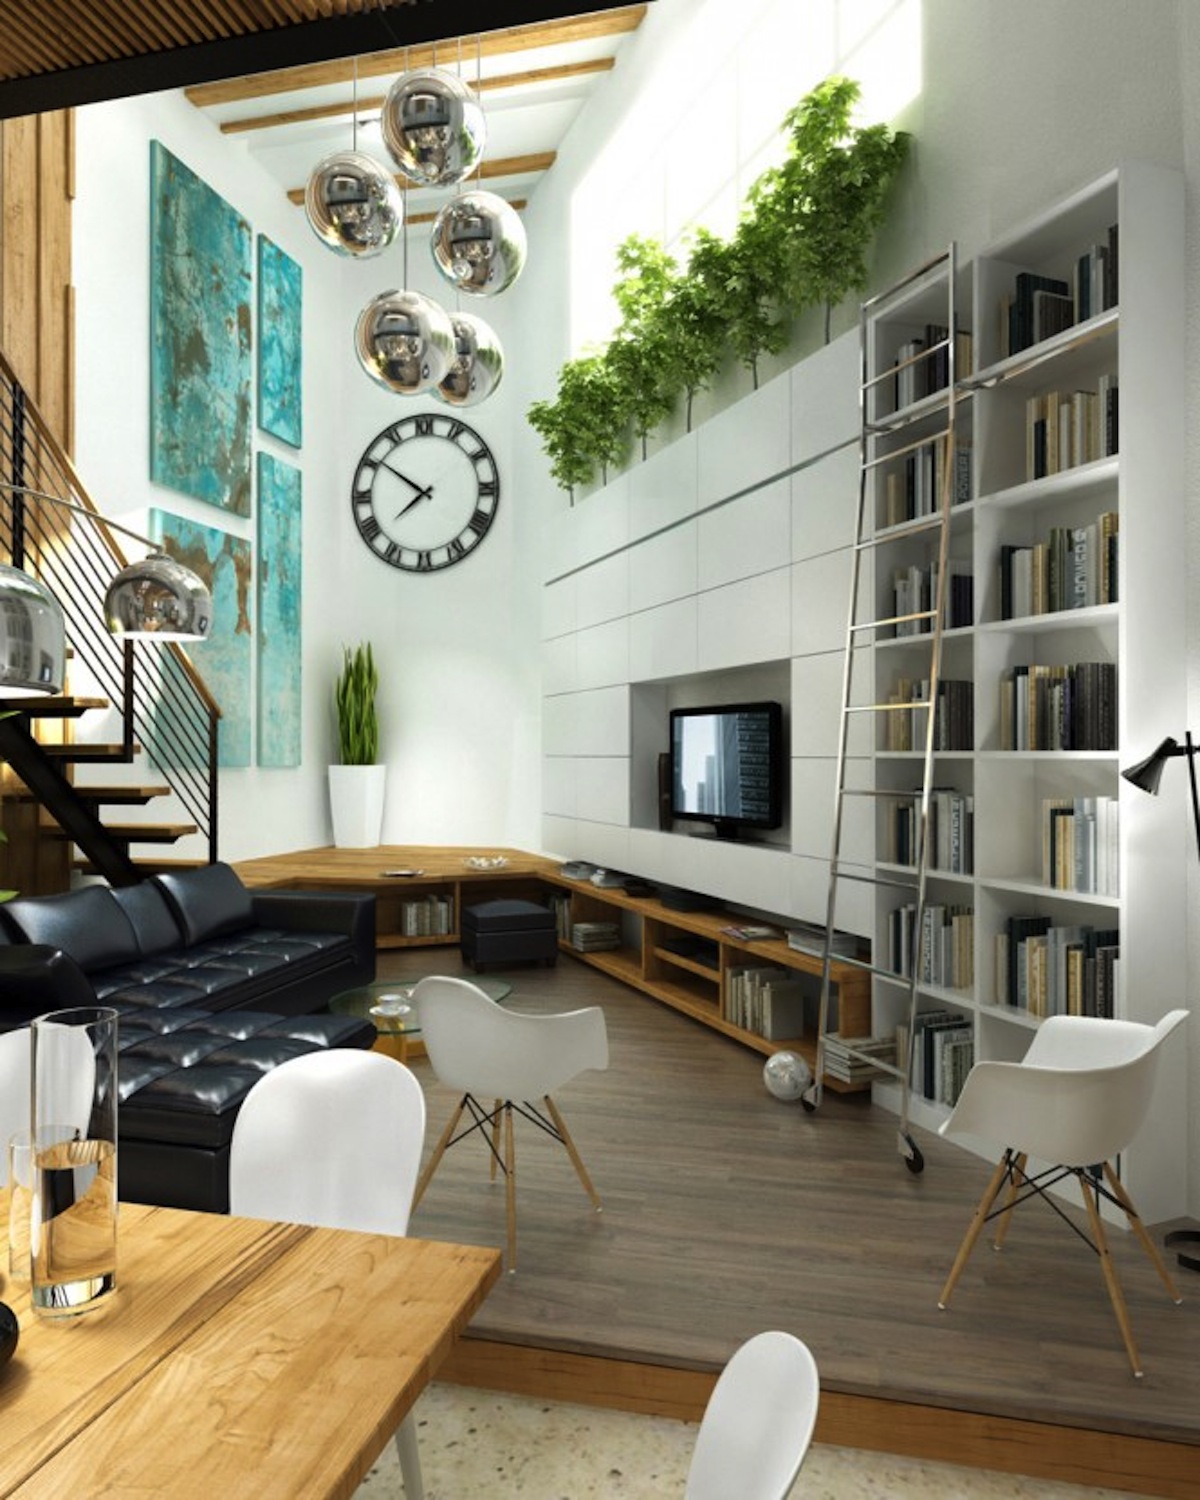 Leather L Unit Black Leather L Shape Sofa Unit And White Chairs Furniture Beside Highest Bookcase Living Room 11 Cozy Modern Living Room Design Ideas For Families Of All Ages